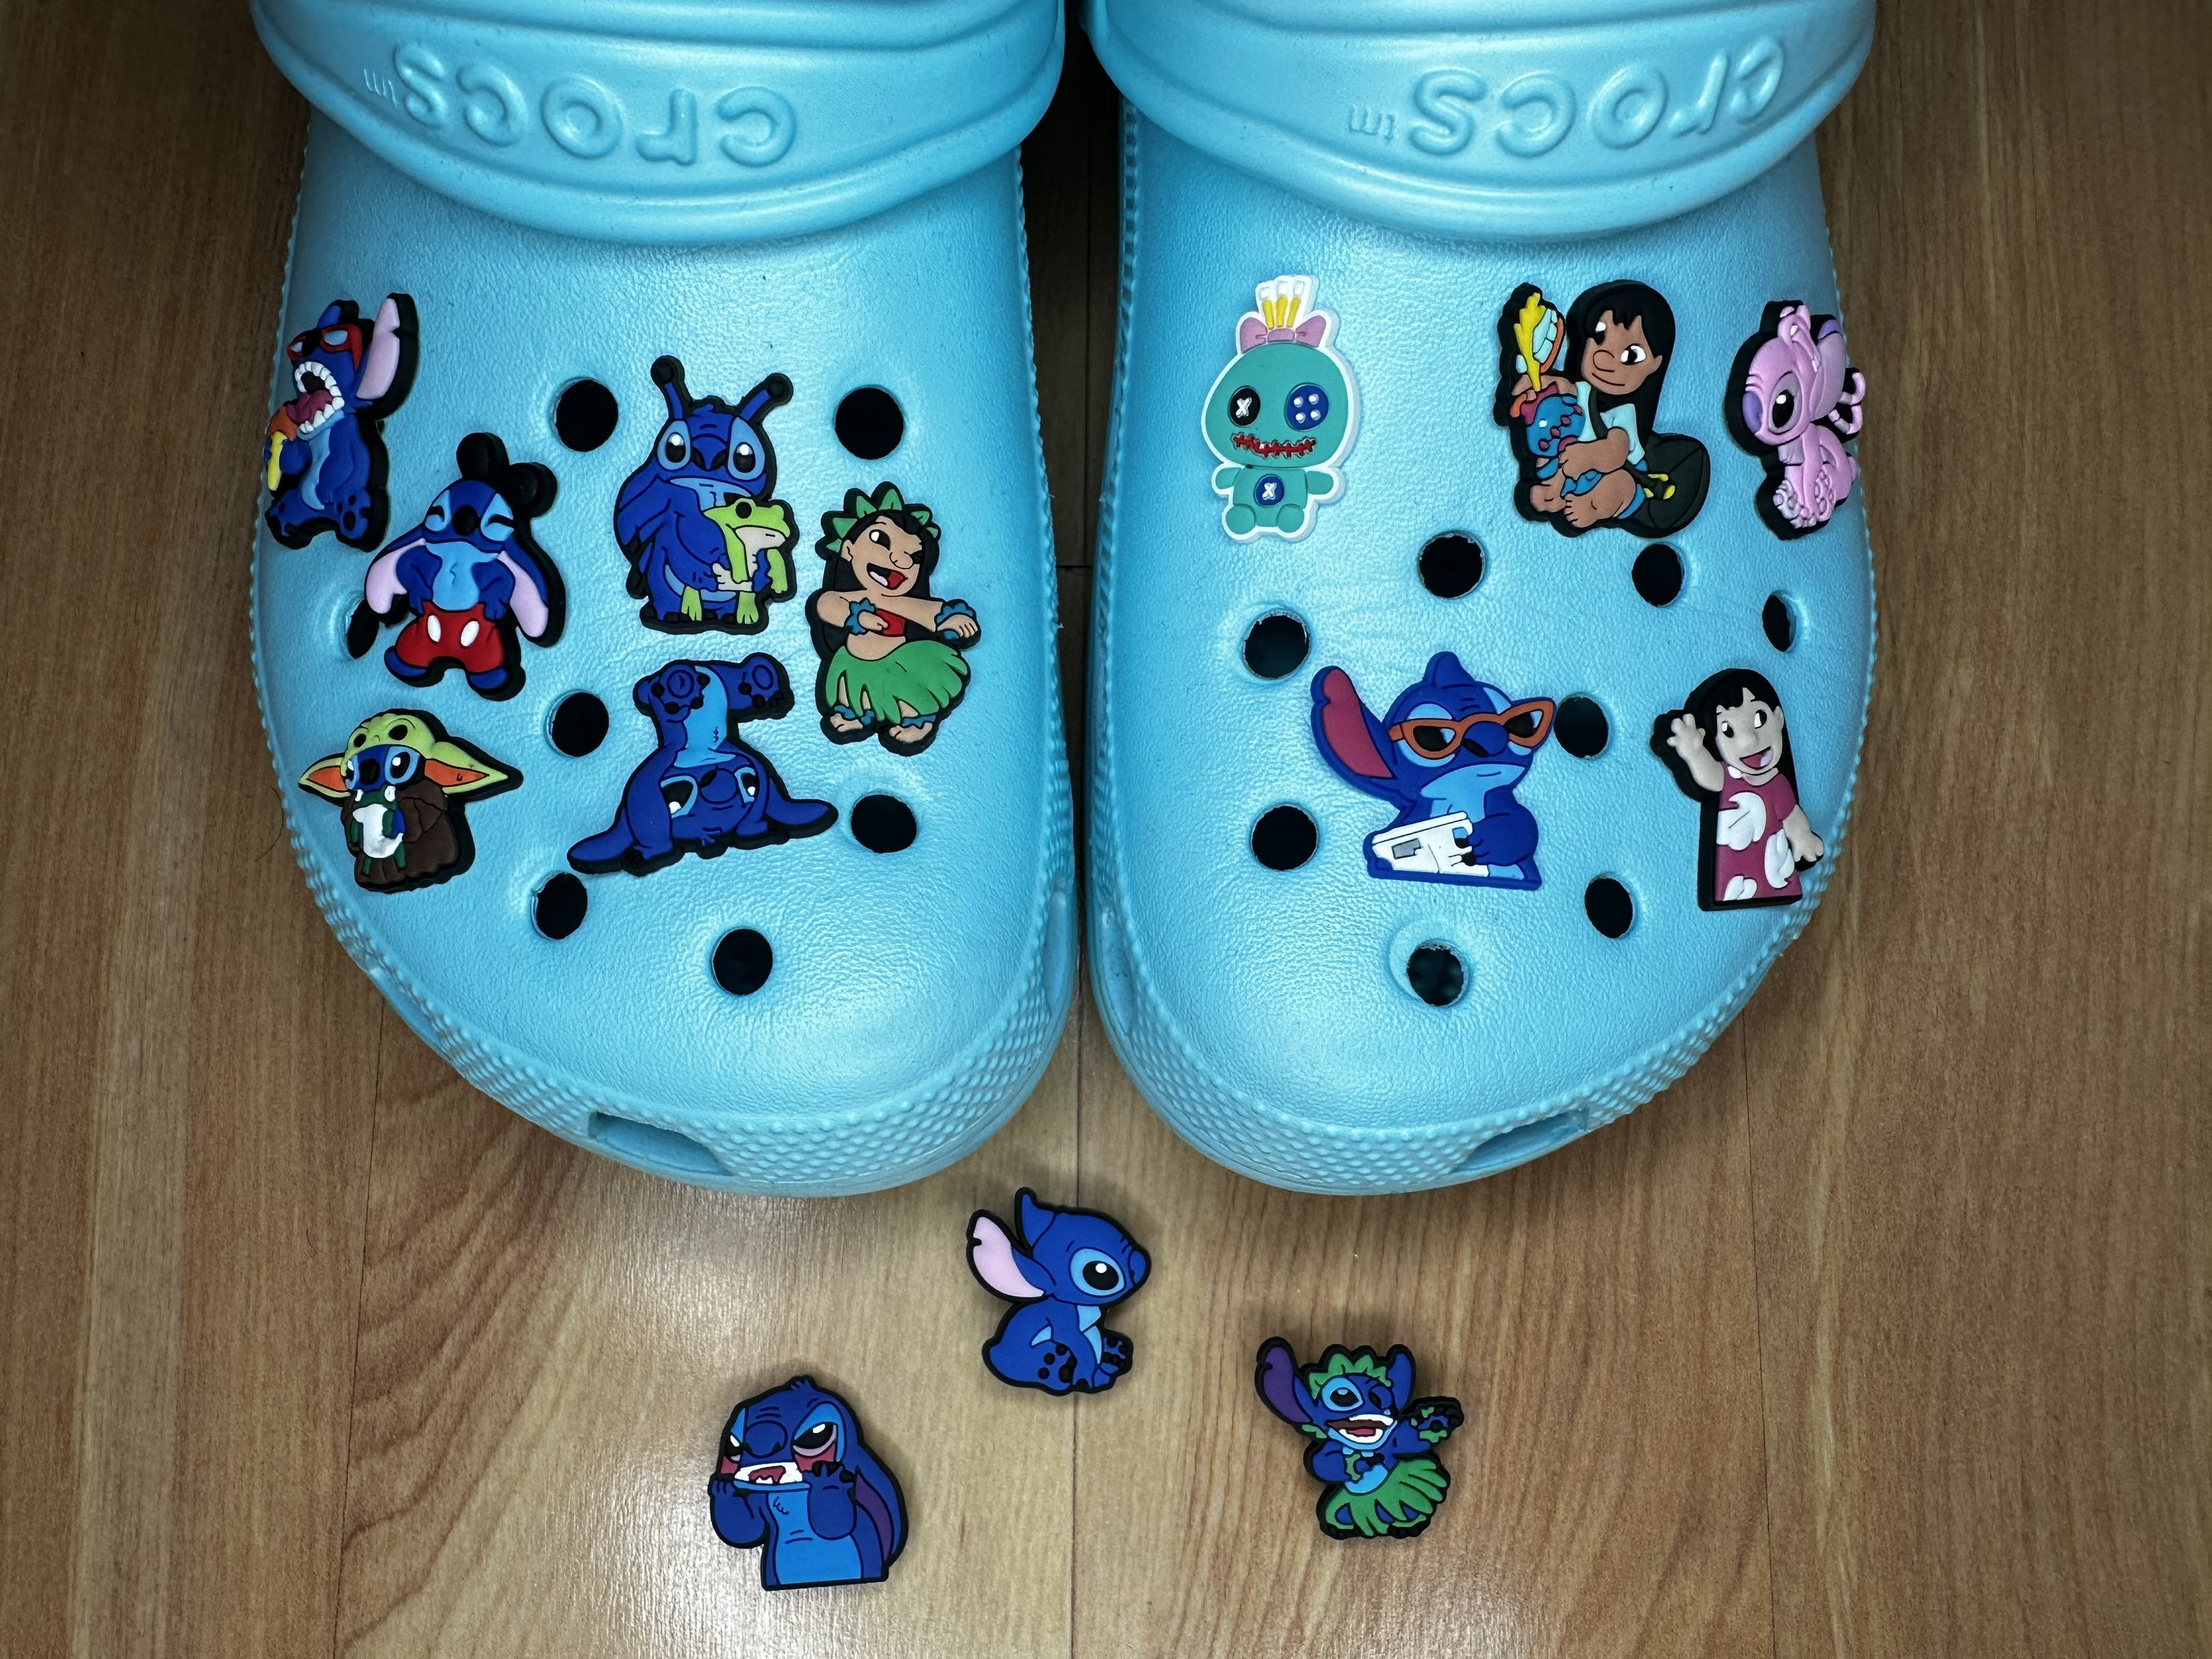 Stitch croc charms available now! #fyp #liloandstitch #liloystich